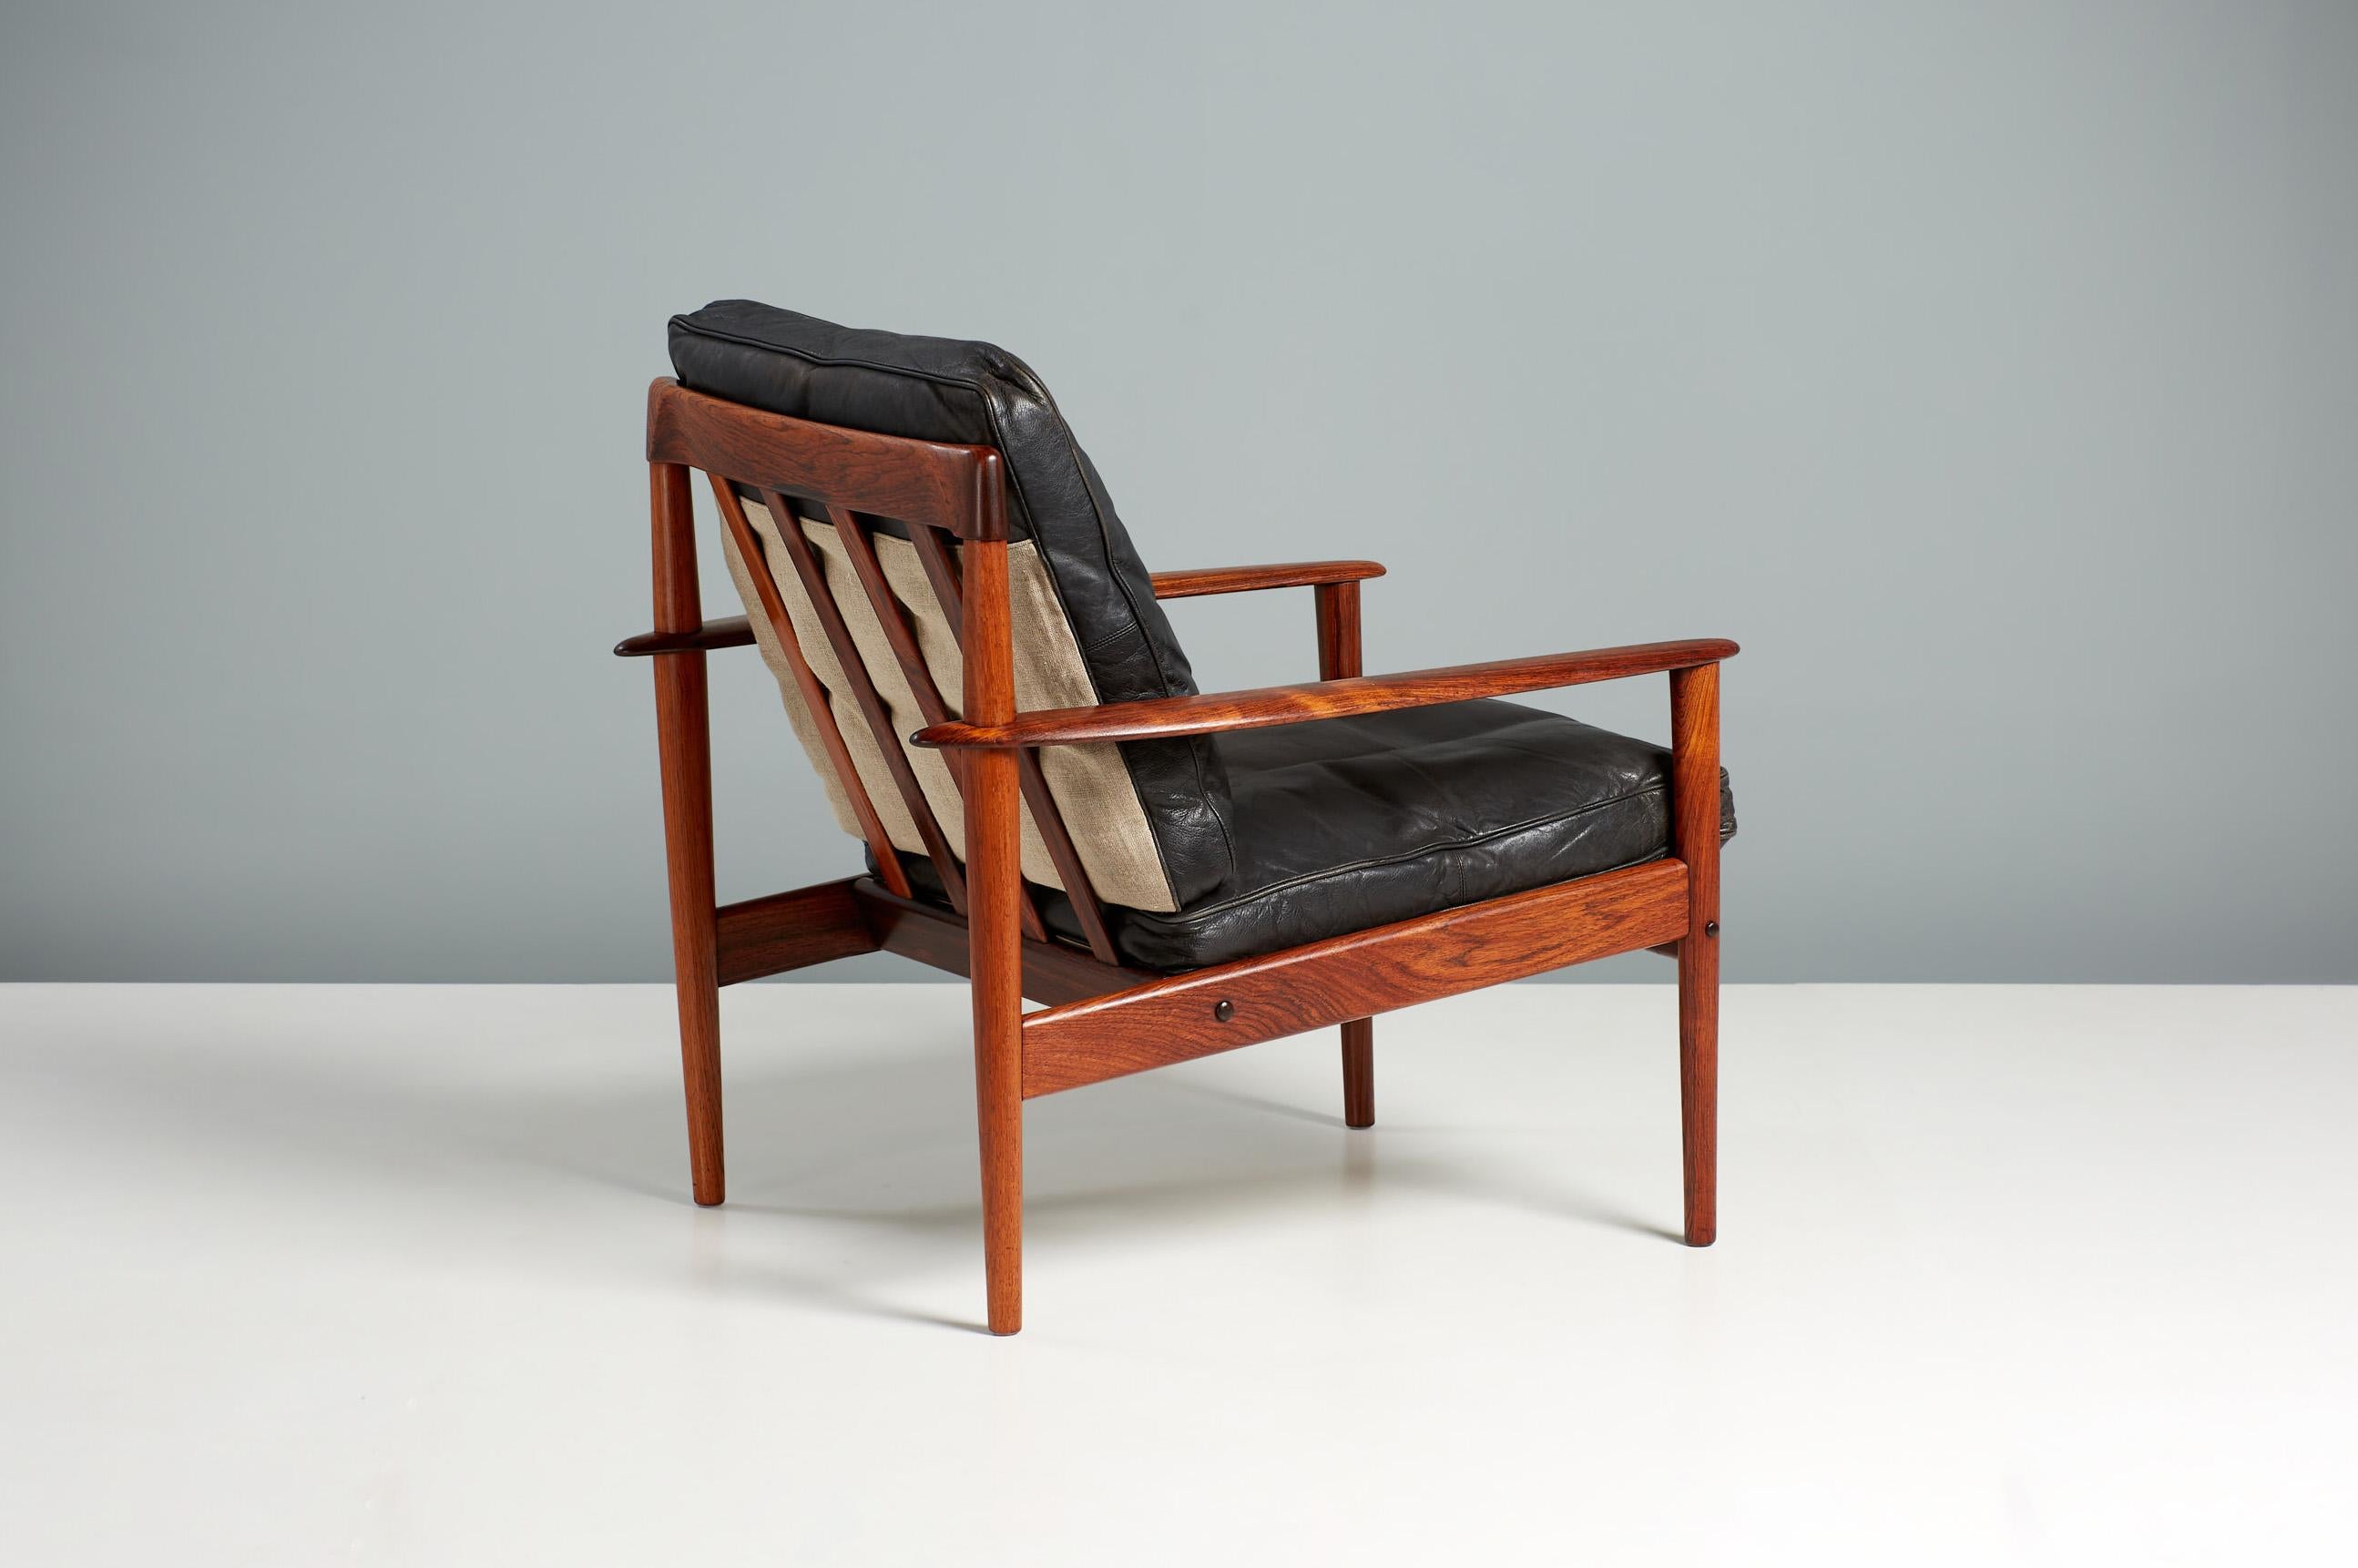 Grete Jalk Model PJ-56 Lounge chairs

A beautiful pair of lounge chairs designed by Grete Jalk for cabinetmaker Poul Jeppesen in Denmark, circa 1956. These examples come in stunning rosewood that has been refinished in Danish oil at our workshops